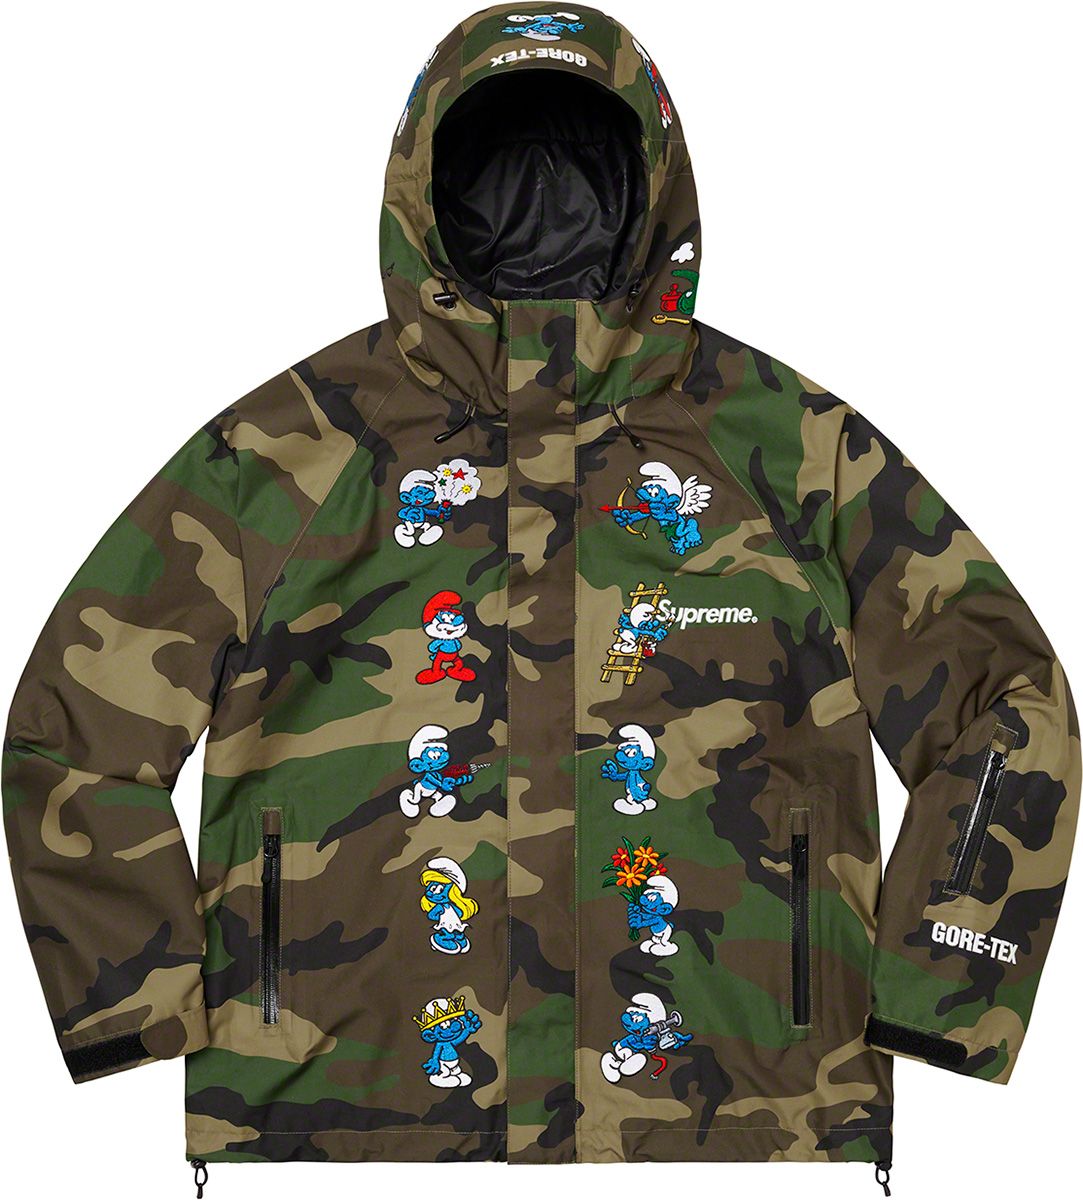 Supreme®/Smurfs™ GORE-TEX Shell Jacket - Fall/Winter 2020 Preview 